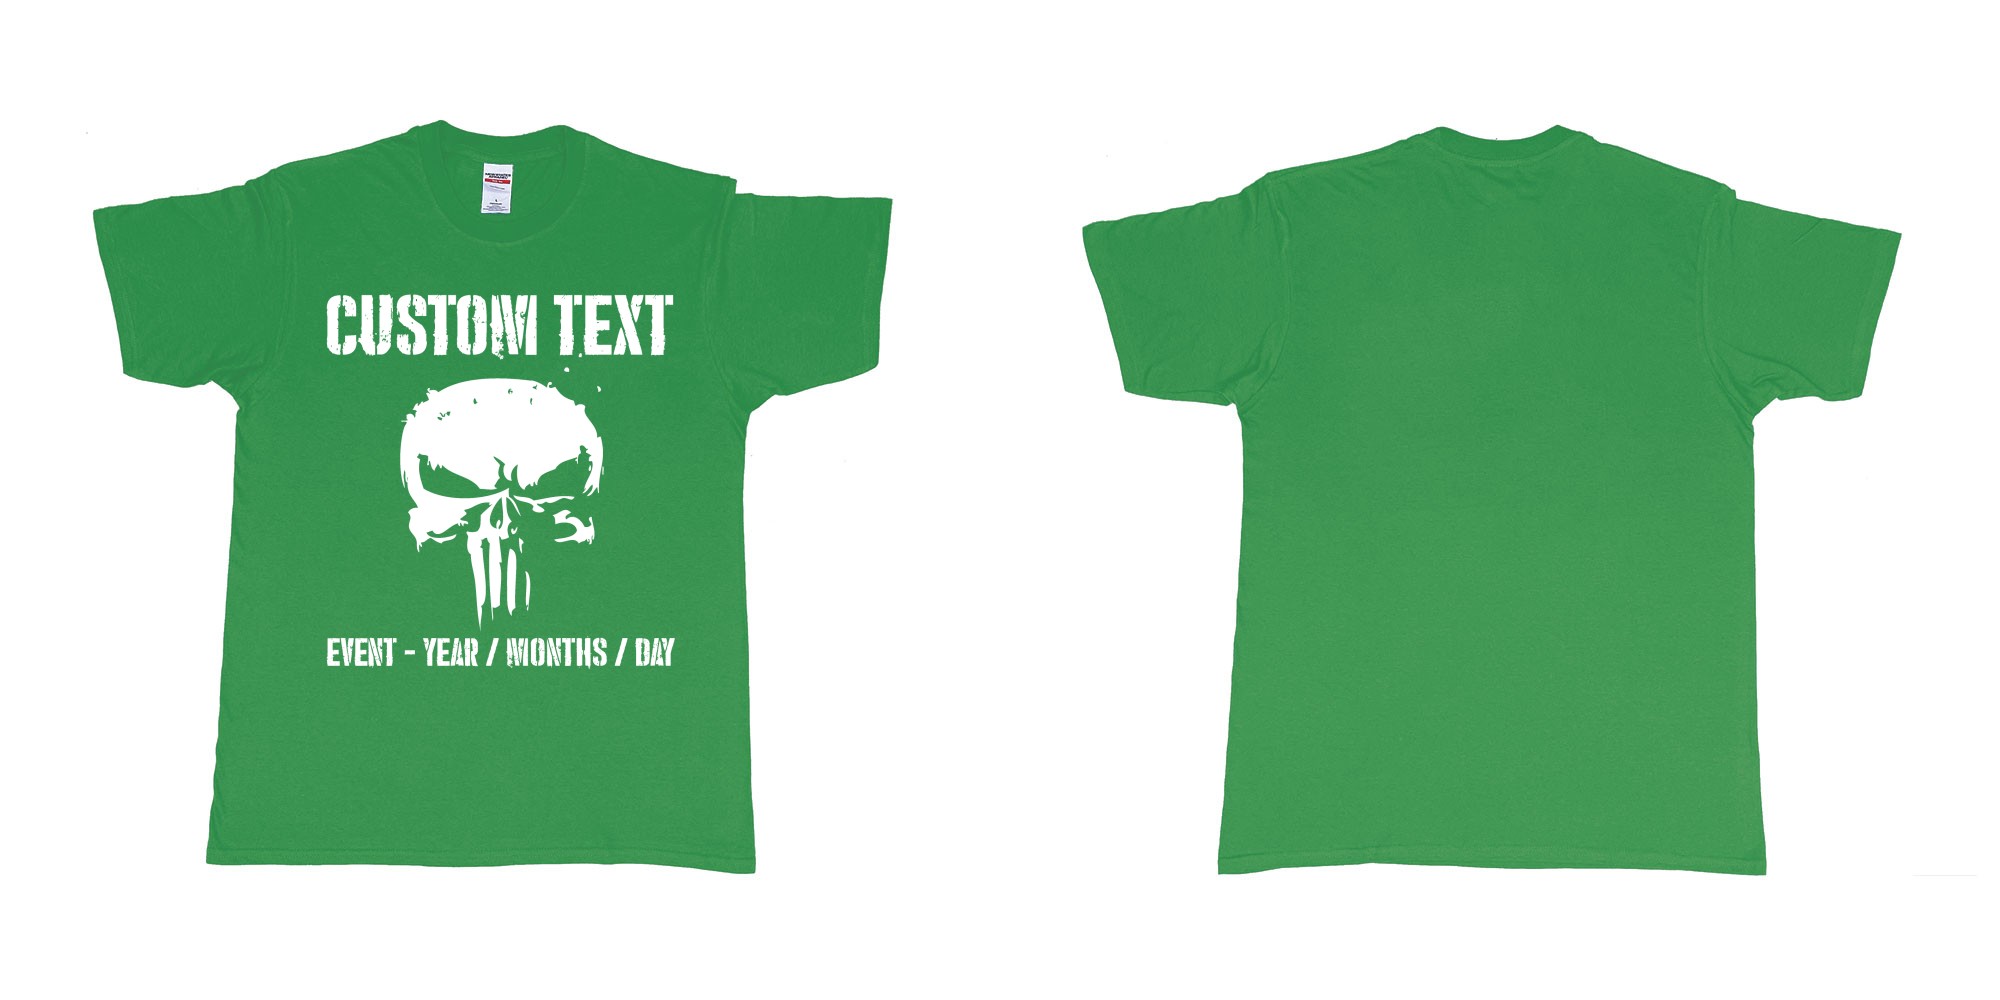 Custom tshirt design the punisher scull logo custom text in fabric color irish-green choice your own text made in Bali by The Pirate Way